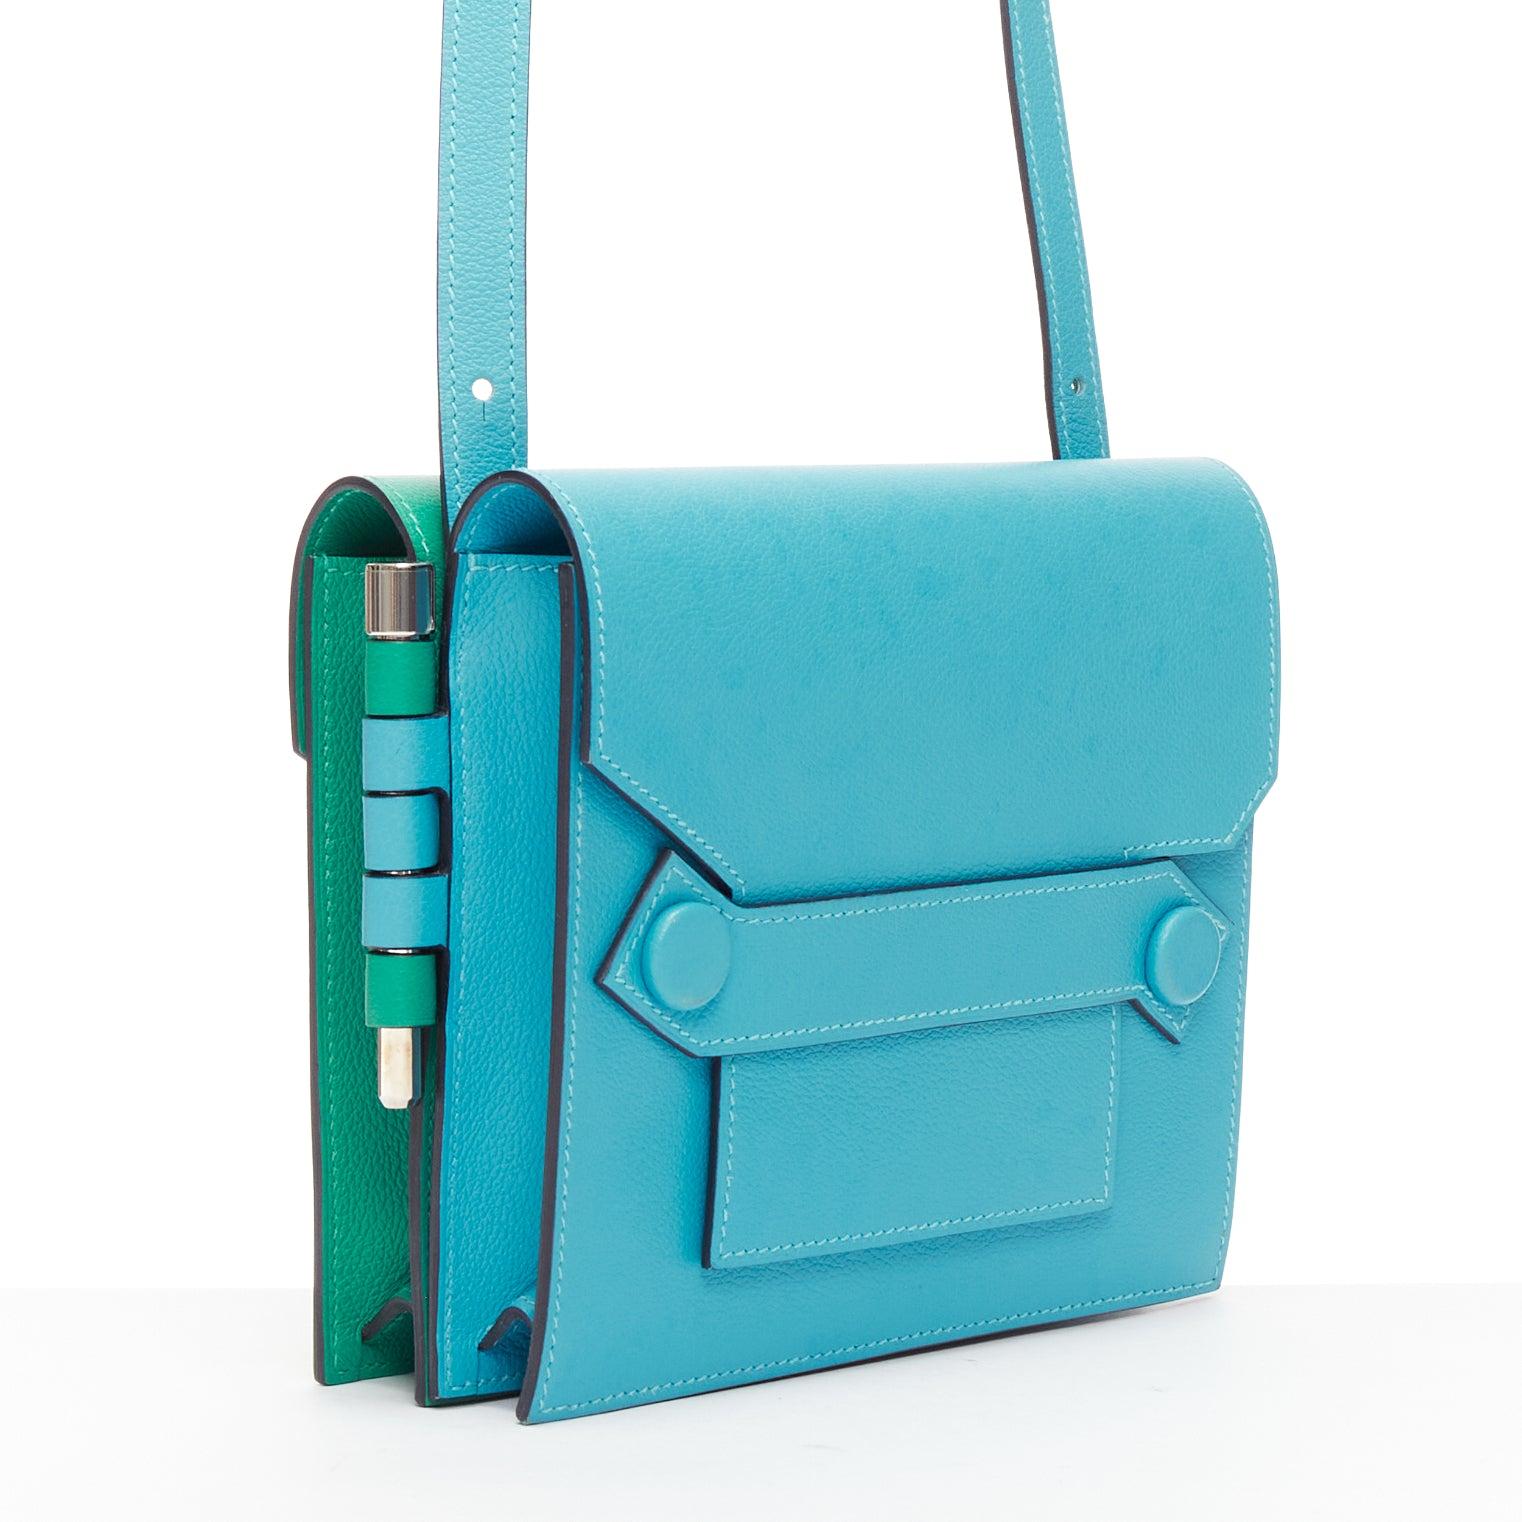 HERMES 2019 Twins green blue asymmetric snap flap reversible crossbody bag
Reference: KYCG/A00038
Brand: Hermes
Model: Twins
Collection: SS 2019
Material: Leather
Color: Blue, Green
Pattern: Solid
Closure: Flap
Lining: Blue Leather
Extra Details: